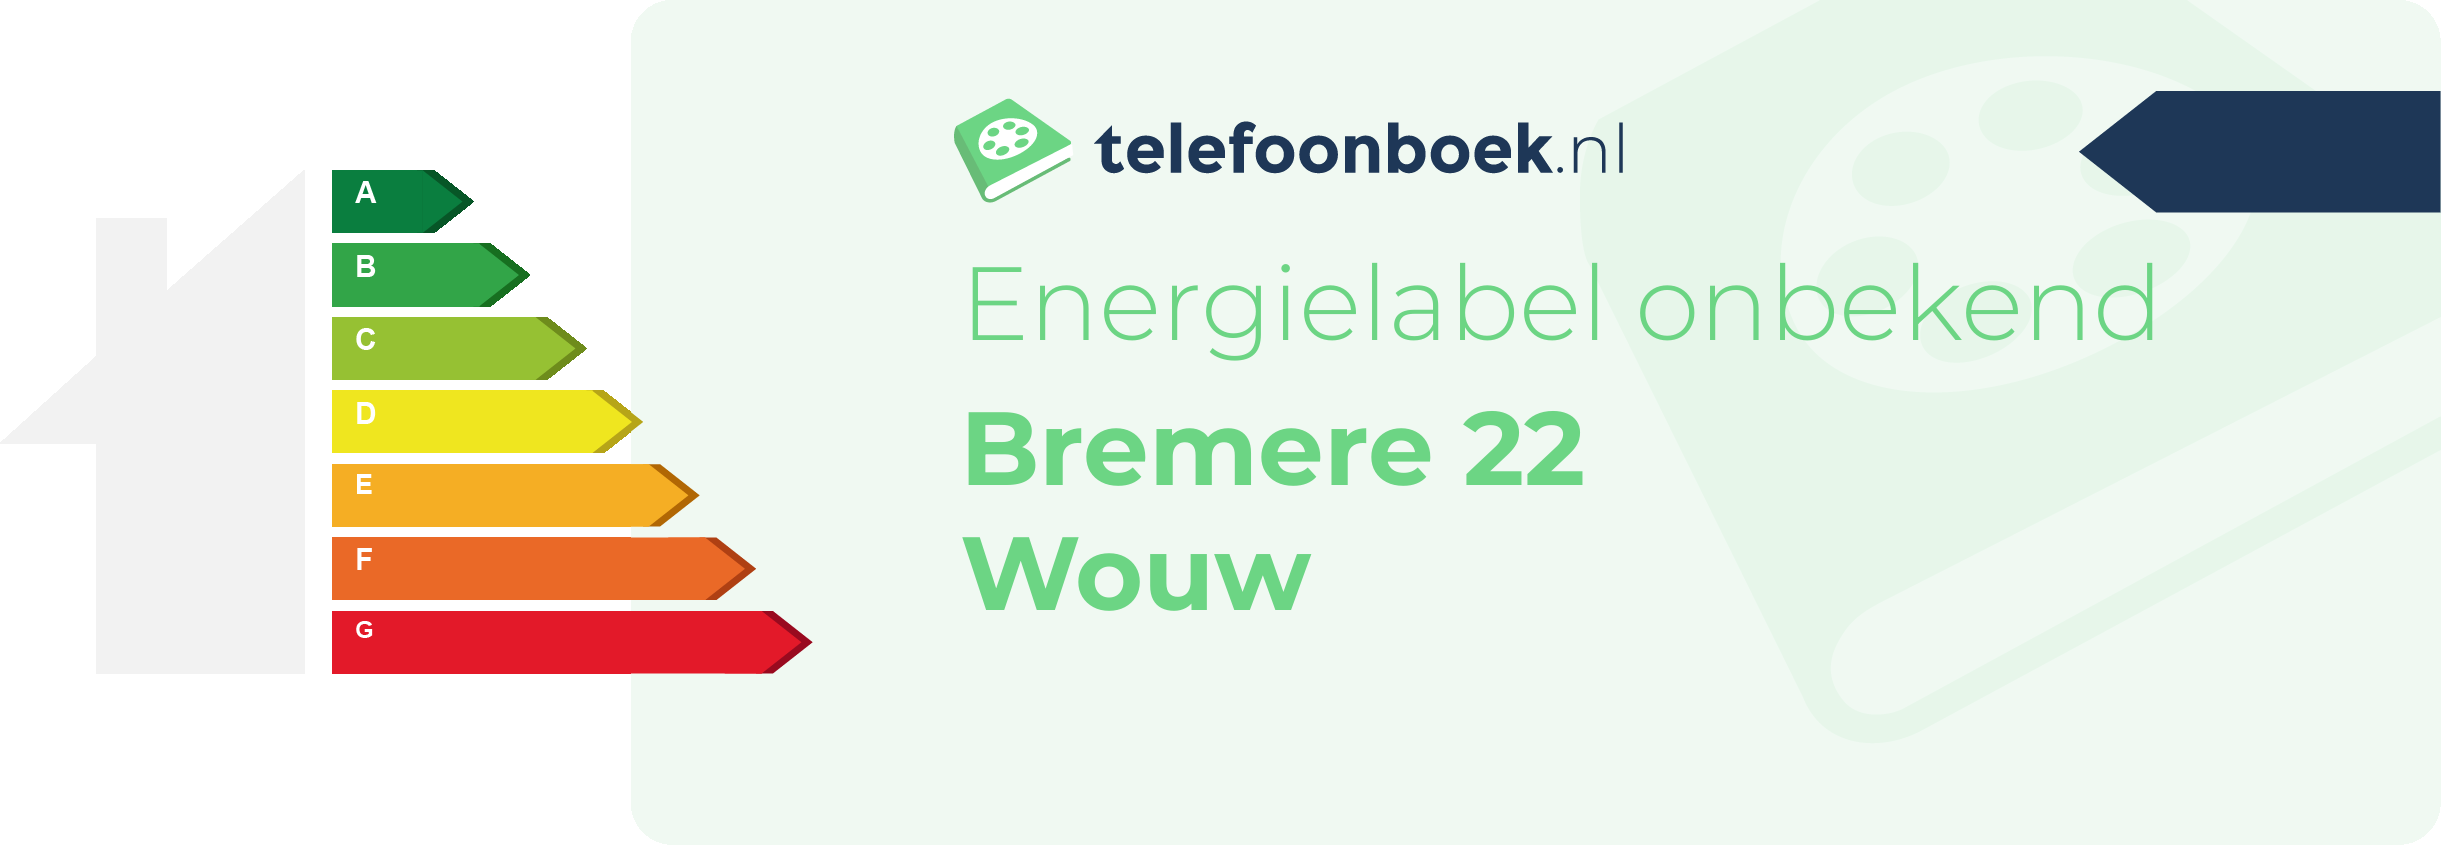 Energielabel Bremere 22 Wouw